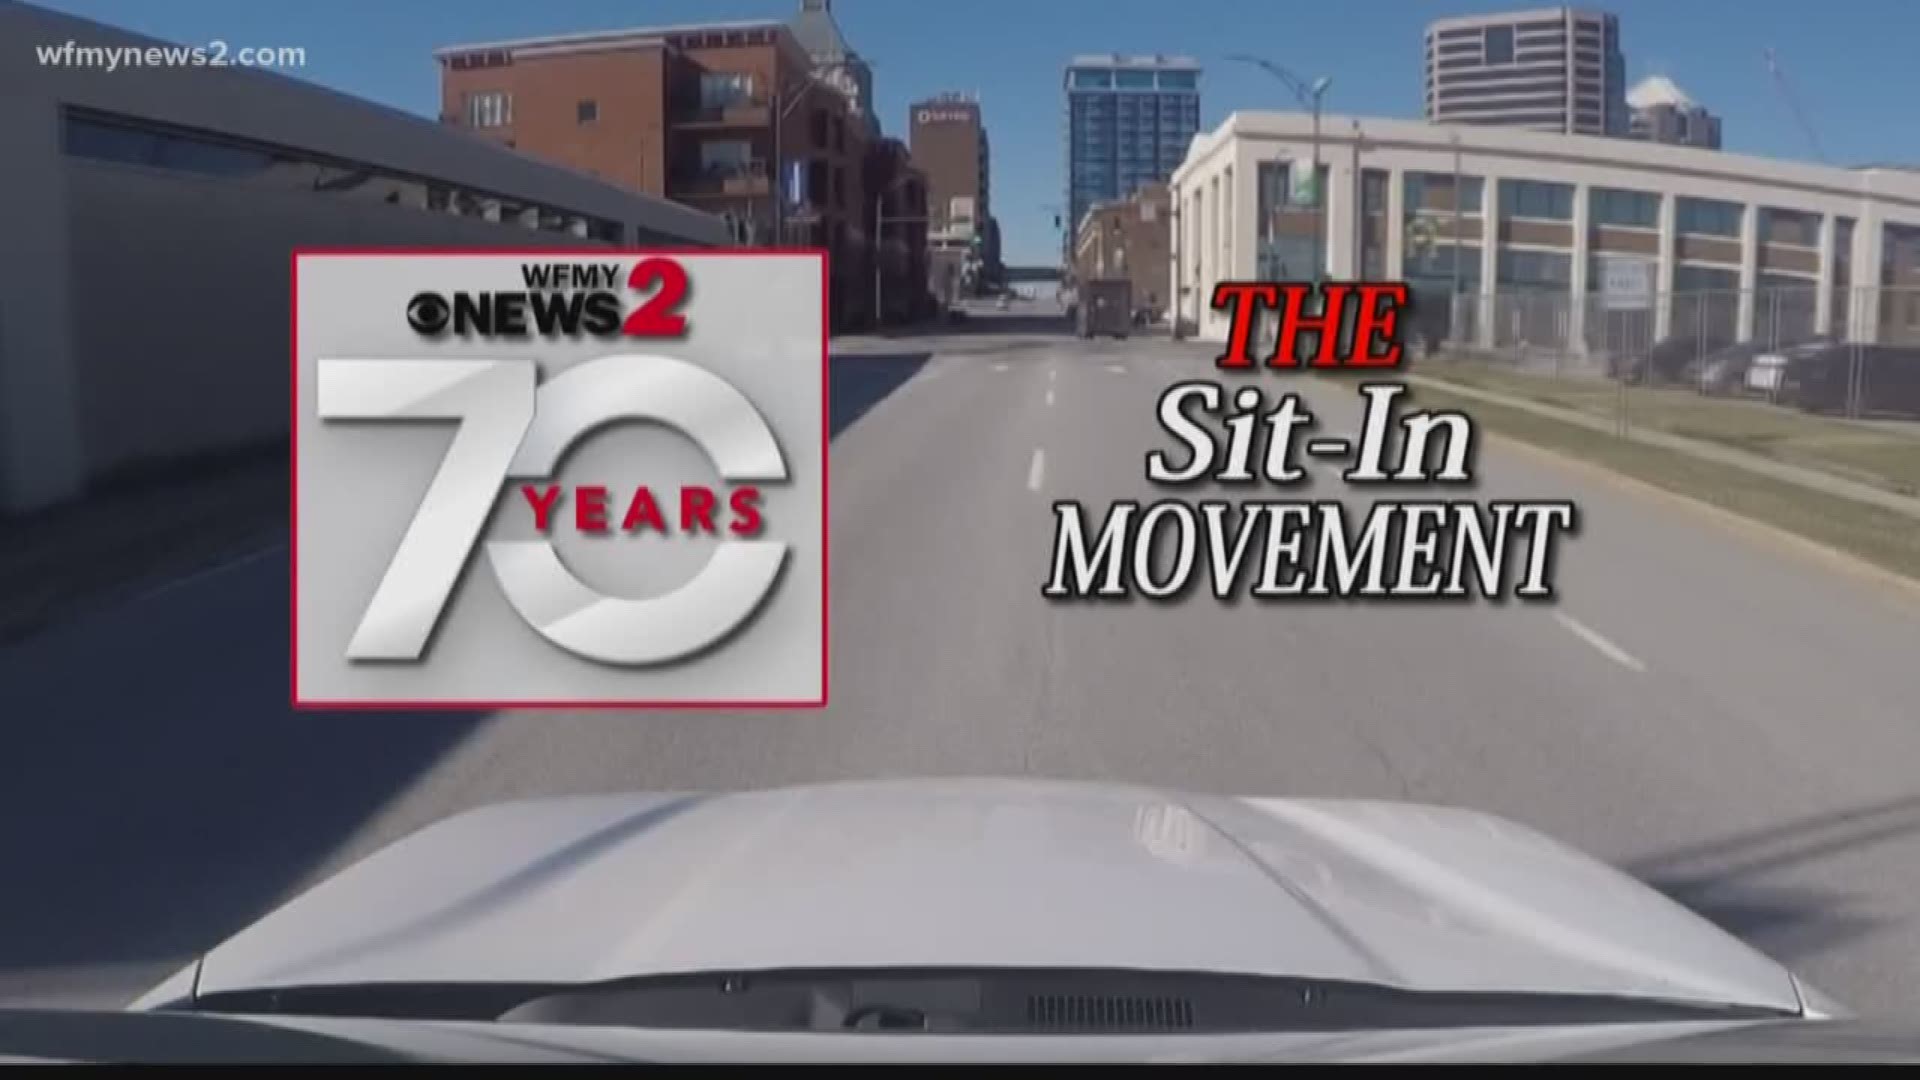 As WFMY News 2 celebrates 70 years, there's a lot of history to look back on in that time. The February 1st date has huge significance that helped shaped the city of Greensboro, our station, and our nation. That's when the sit-in movement began. WFMY News 2's Eric Chilton took a ride through Downtown Greensboro with Sandra Hughes to talk about what it was like to live through it.